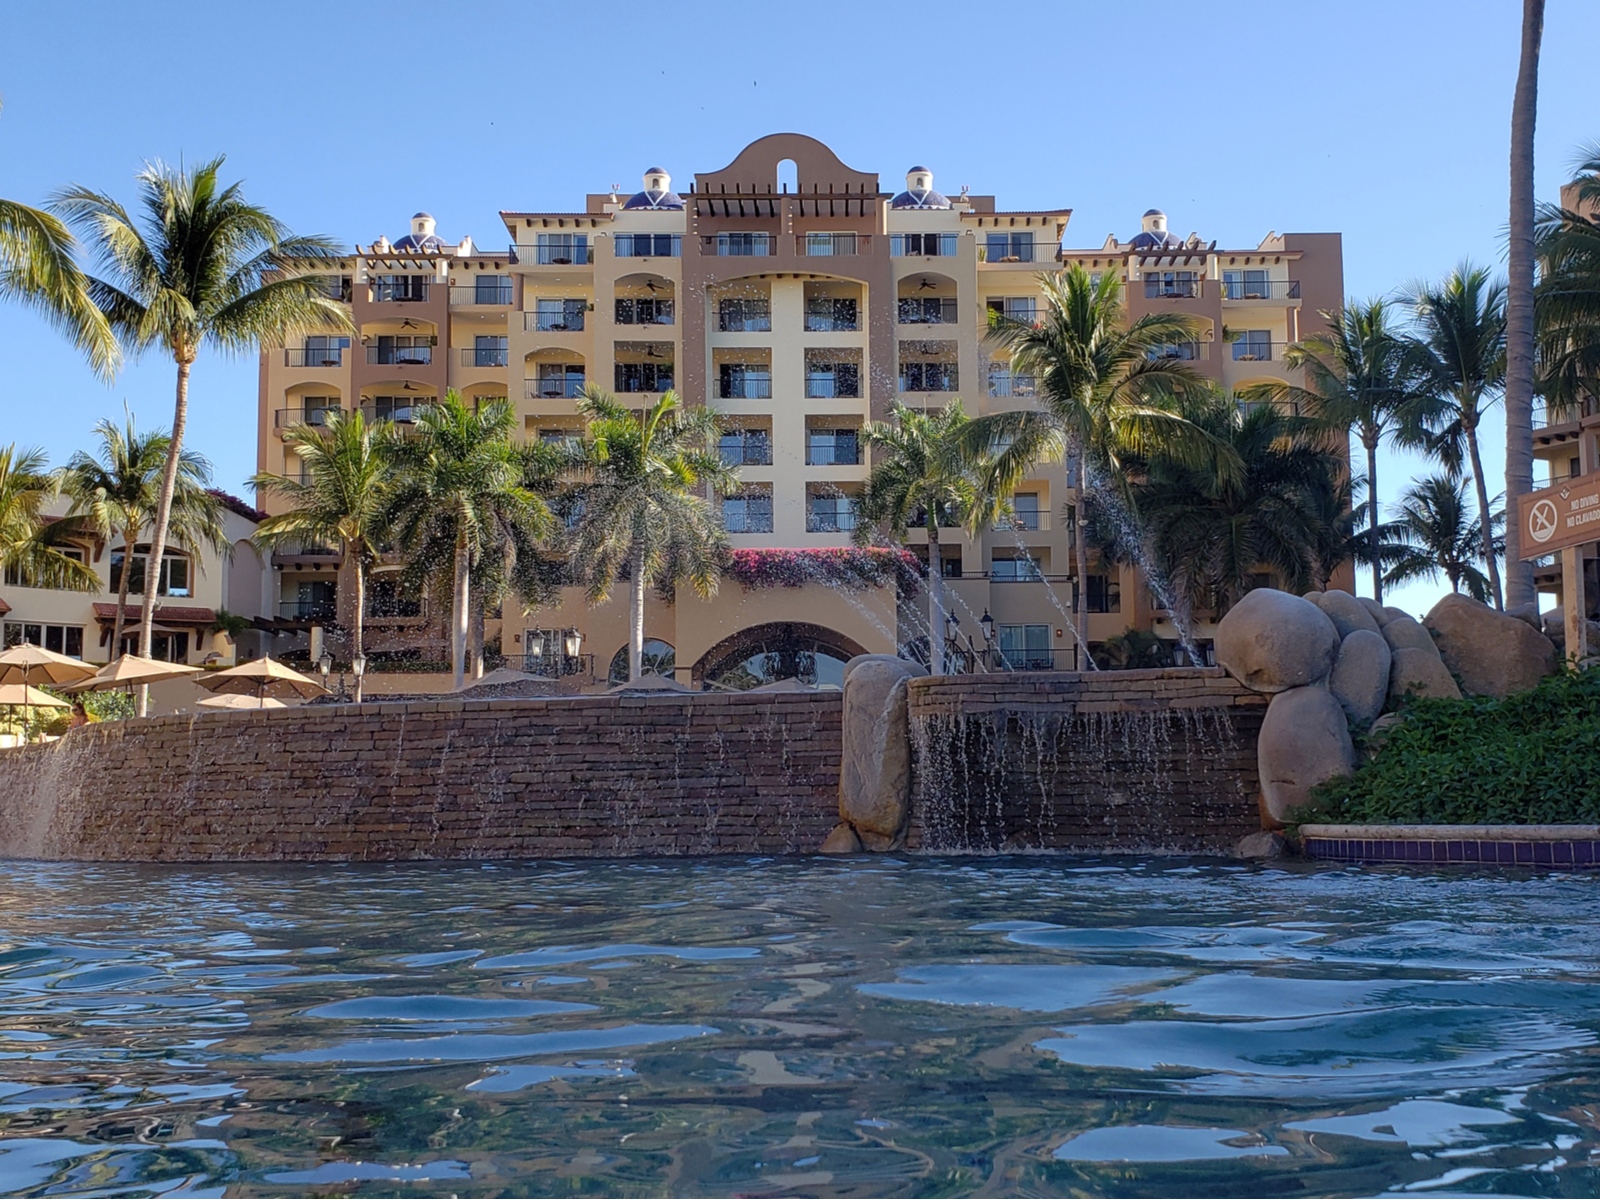 Spouting water on the pool in front of Villa del Palmar Beach Resort & Spa structure with palm trees, a piece on the best all-inclusive resorts in Mexico